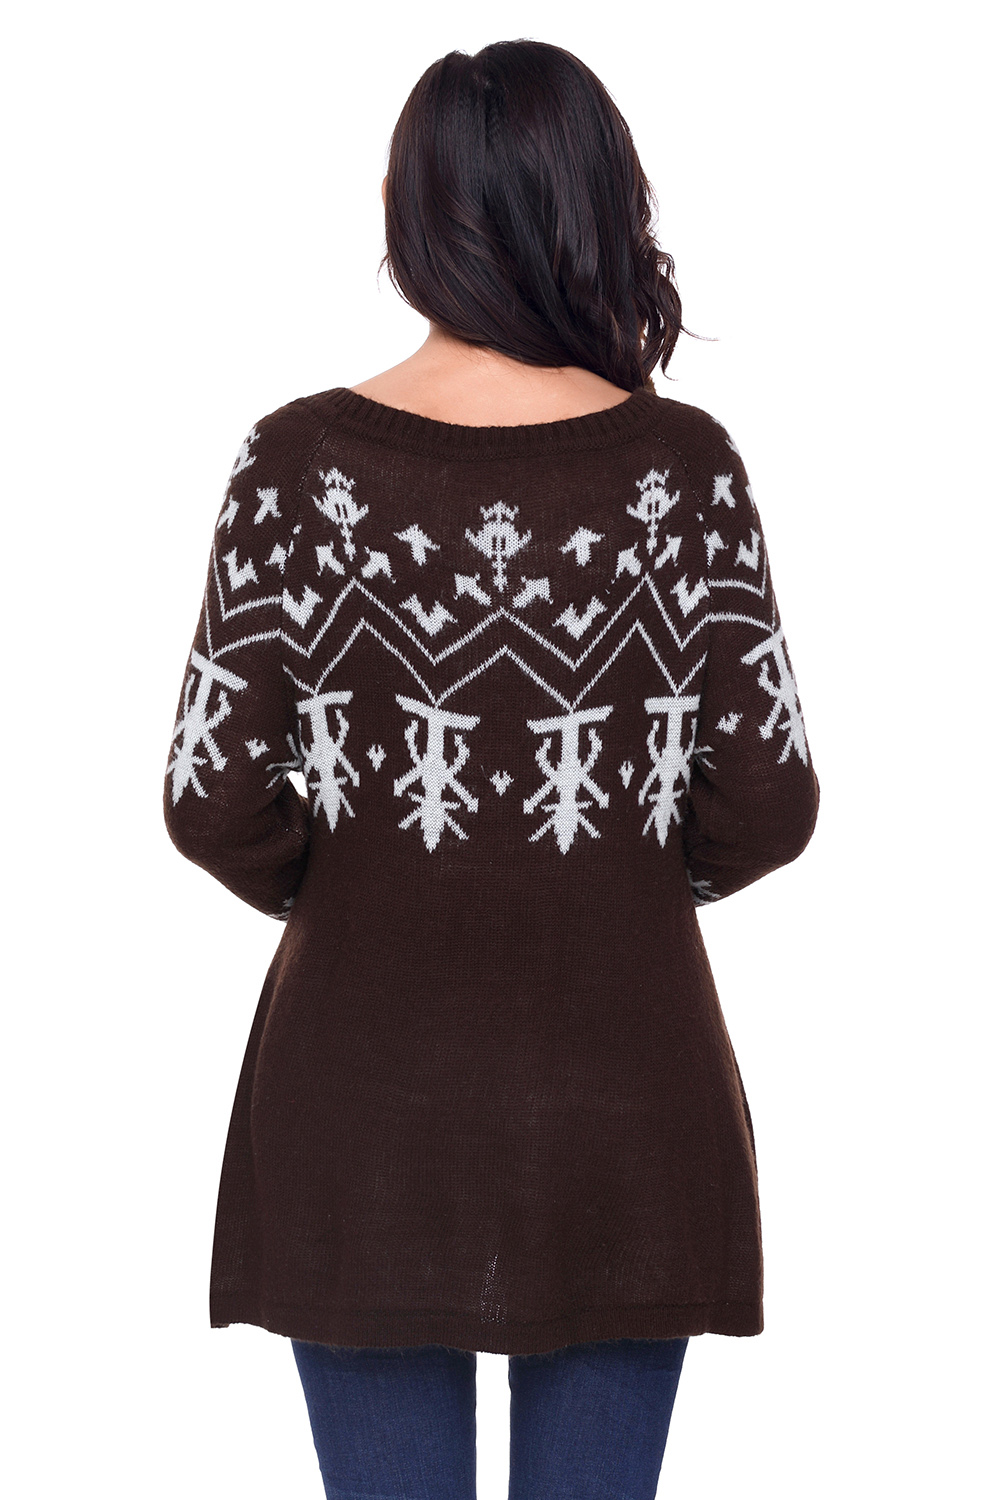 BY27720-17 Brown A-line Casual Fit Christmas Fashion Sweater